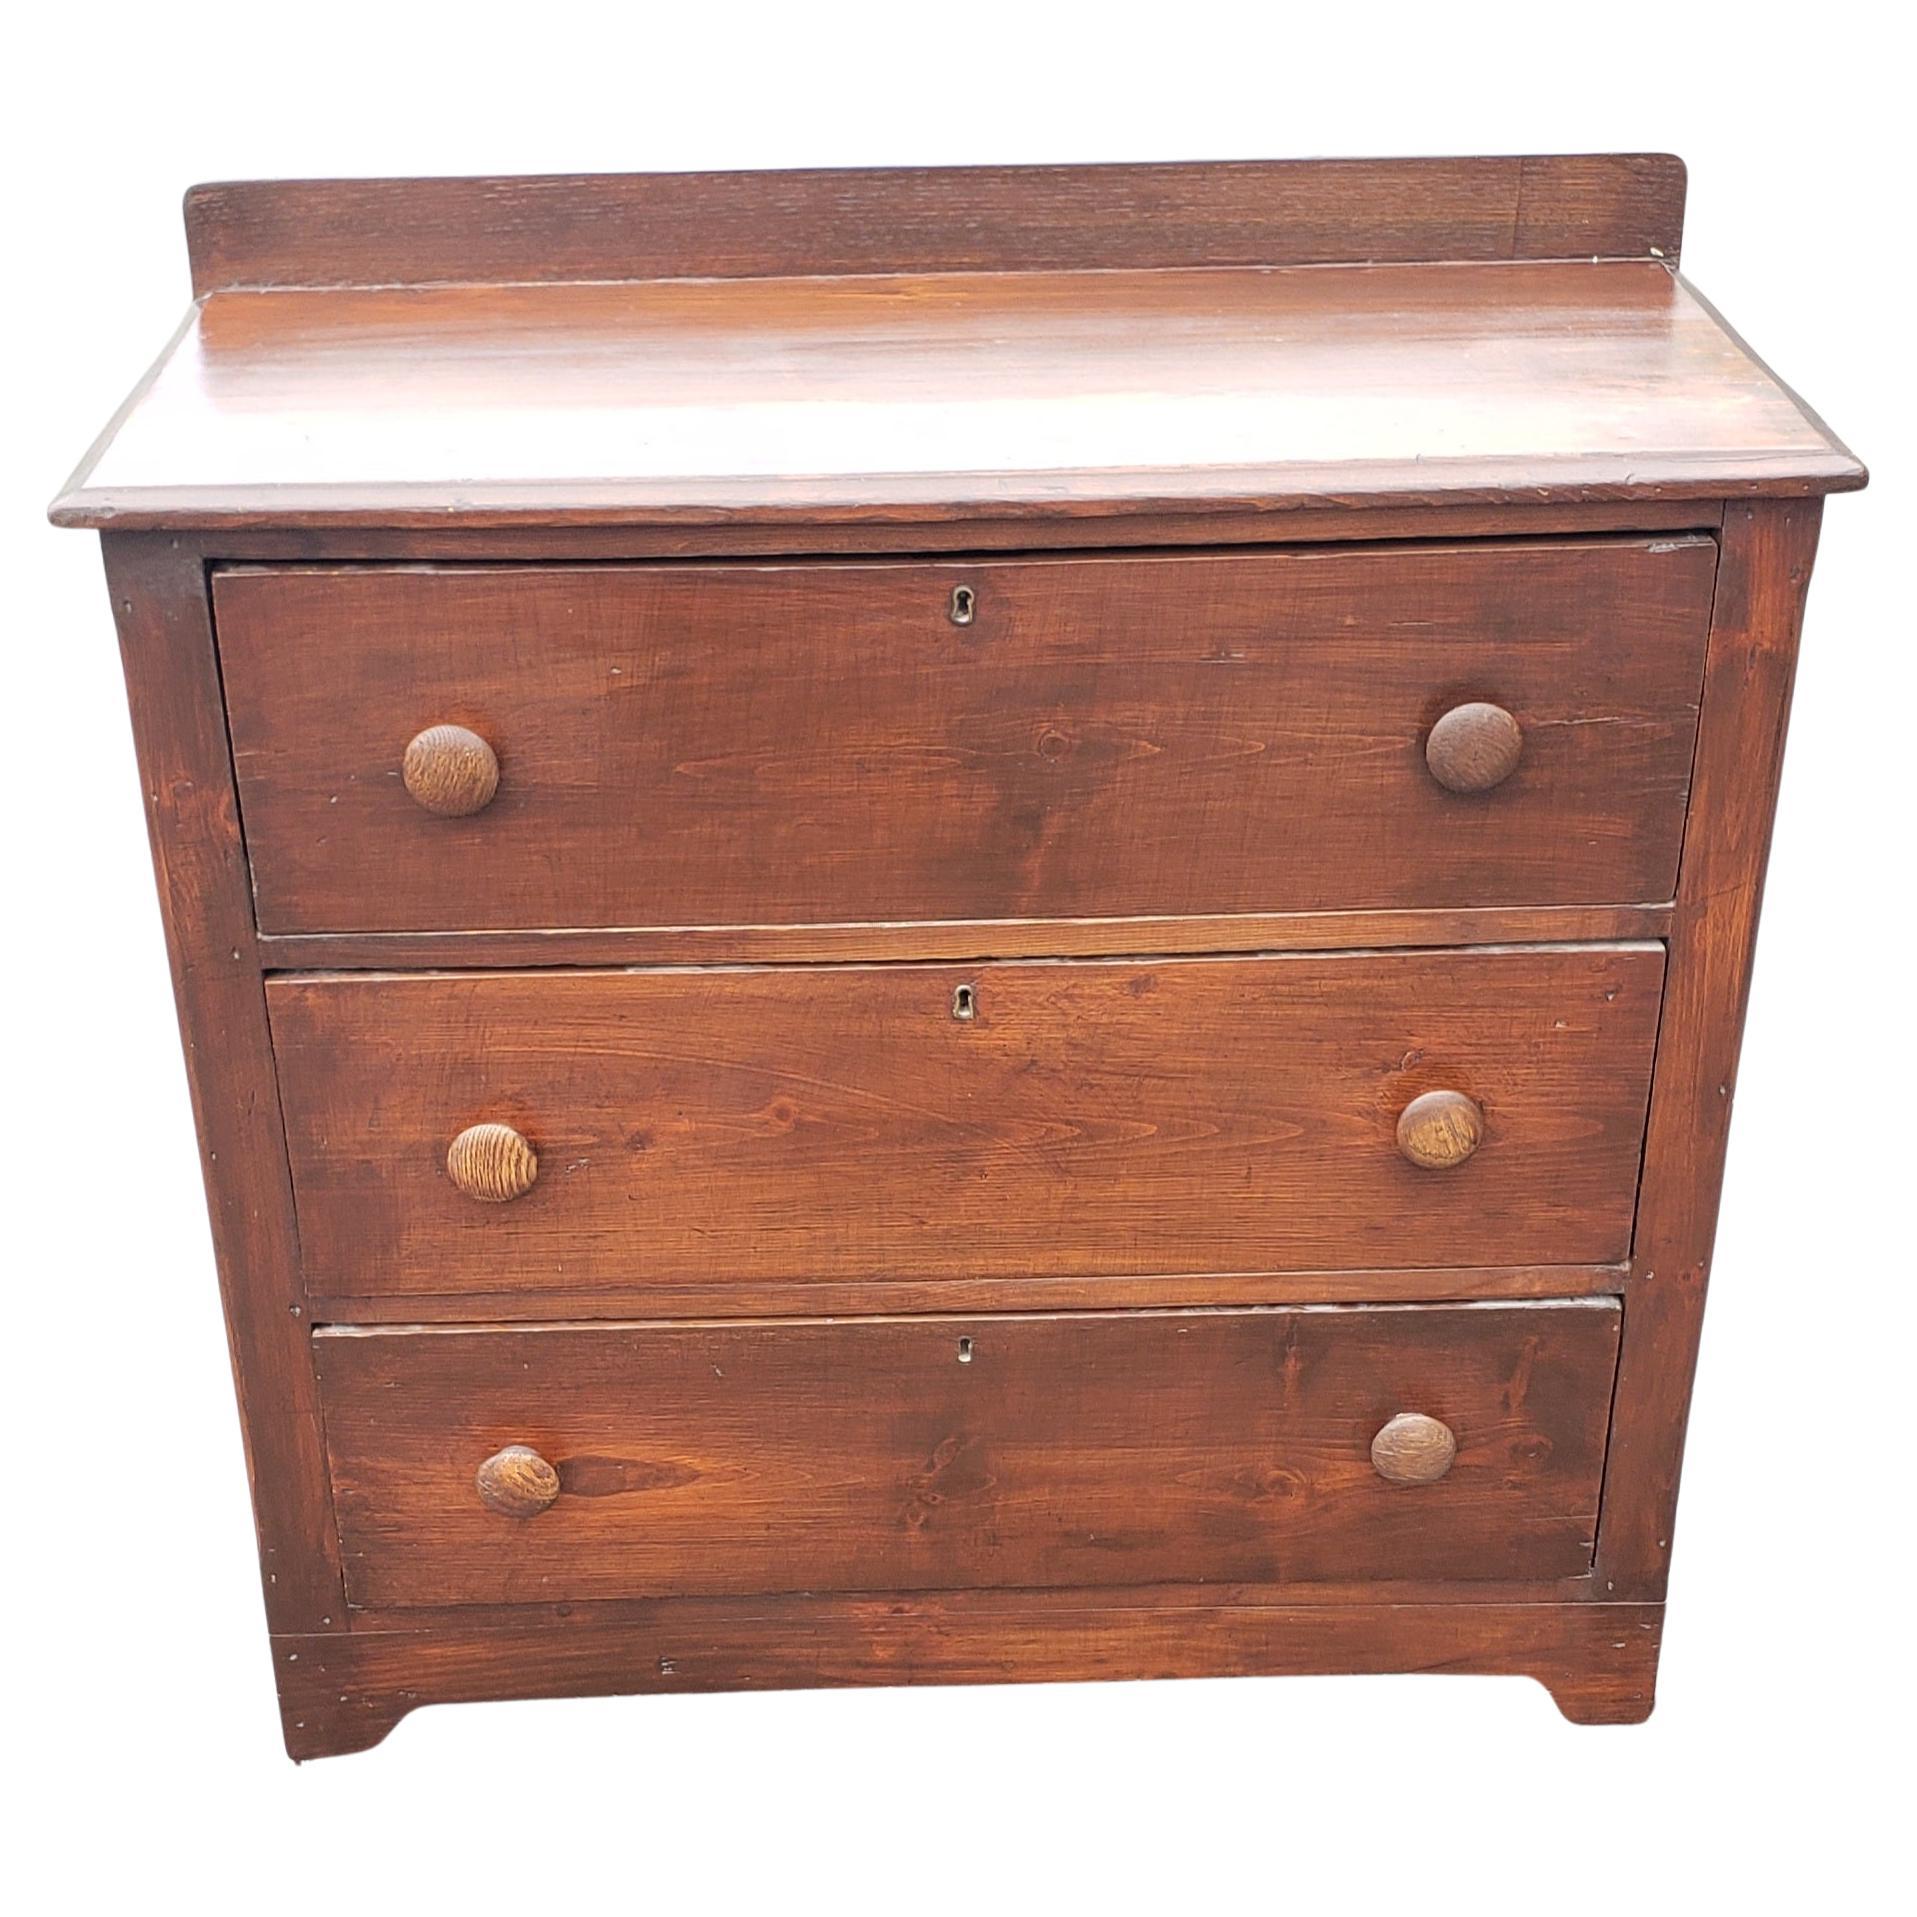 19th Century Early American Red Pine Chest of Drawers on Wheels For Sale